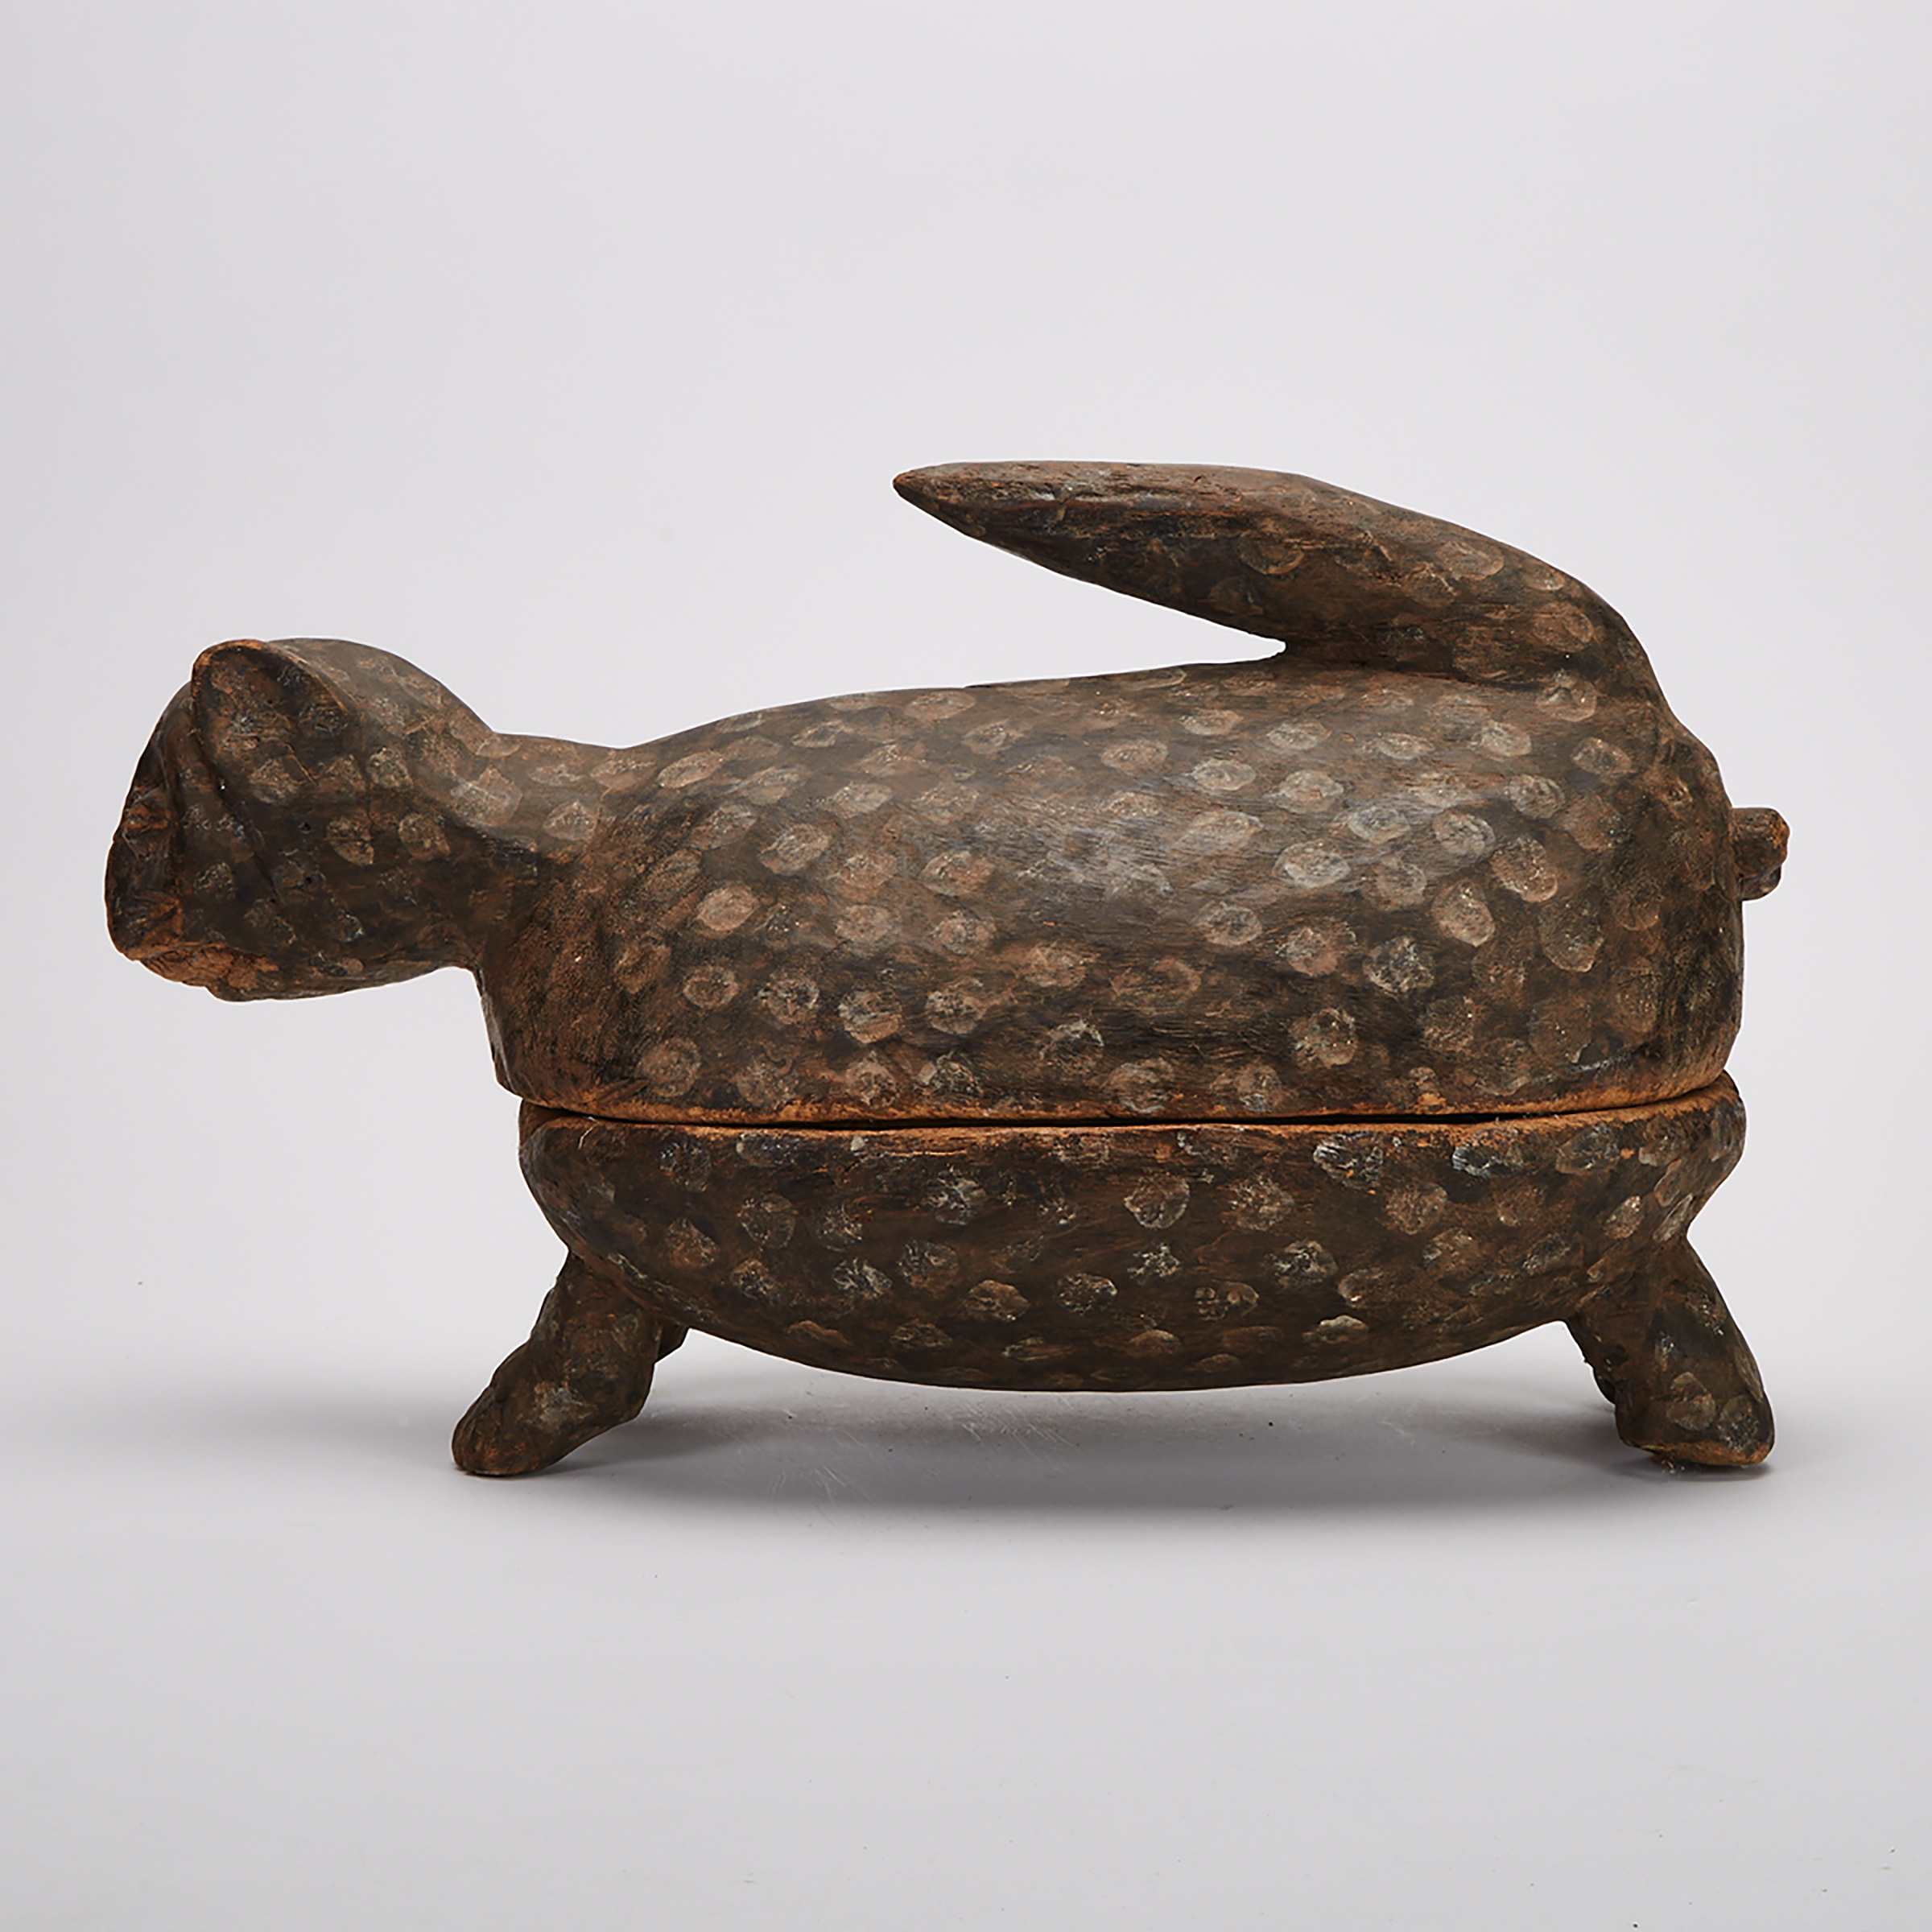 Cat Form Lidded Container, Africa